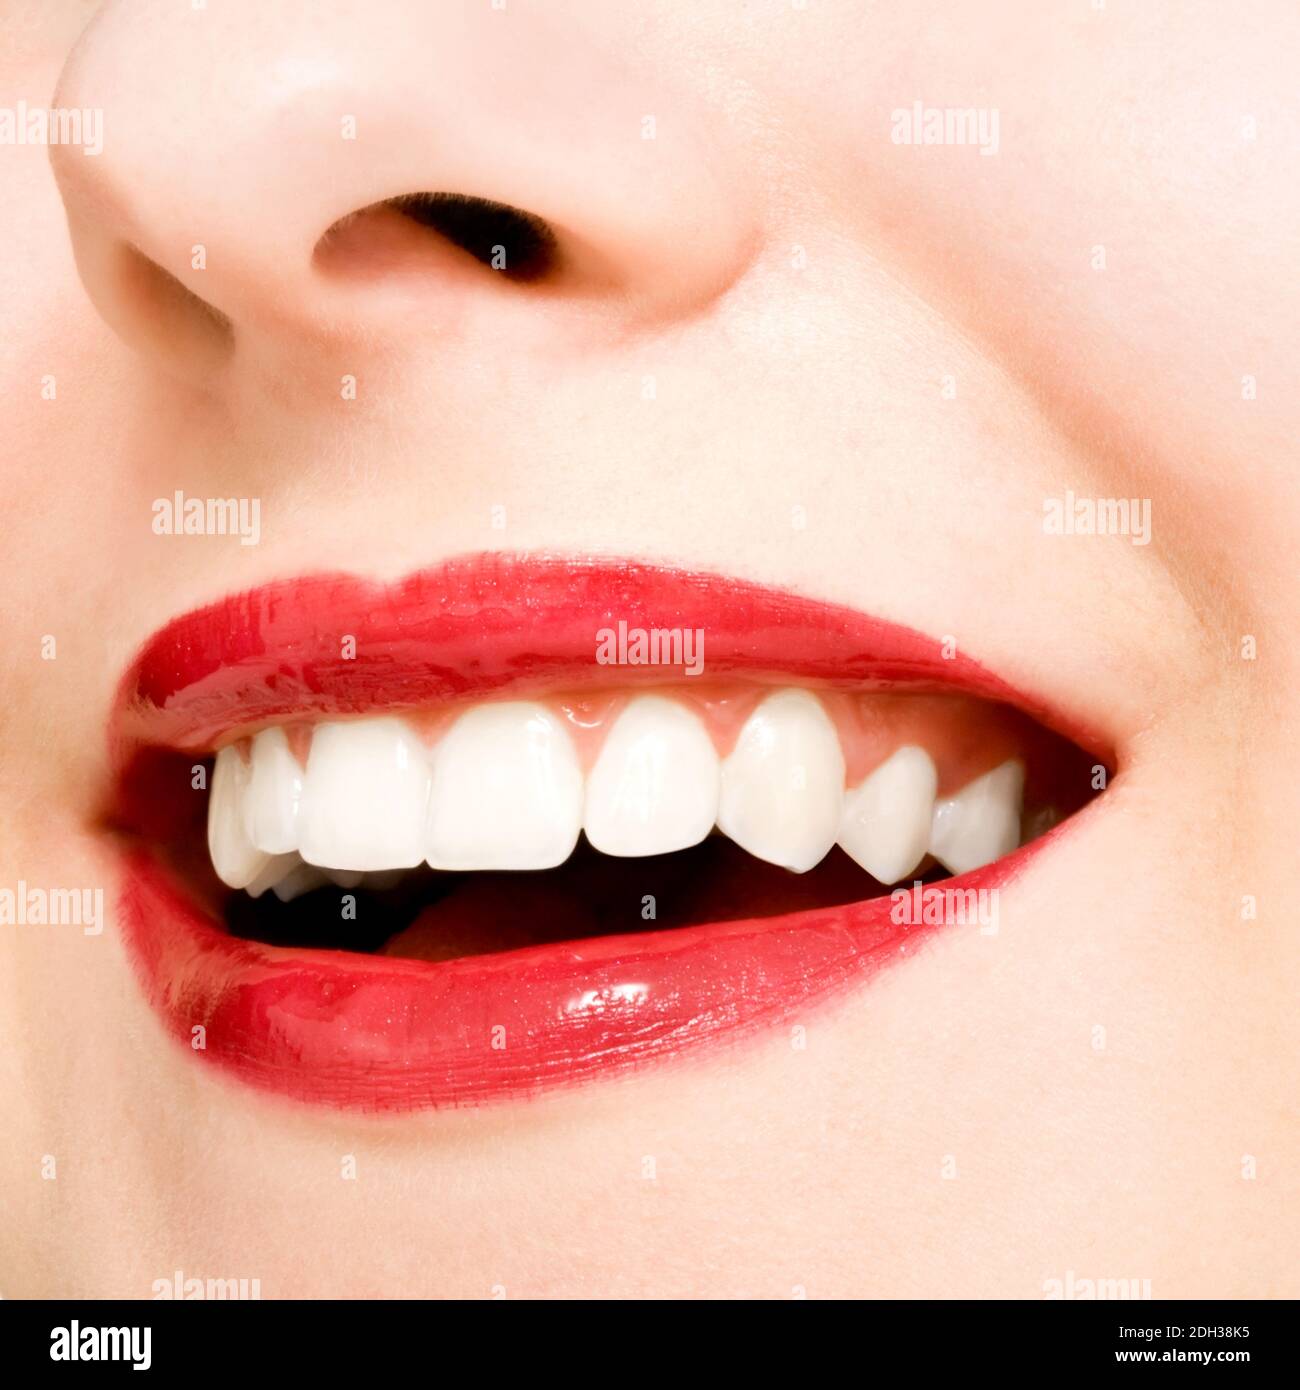 Perfect smile and healthy white natural teeth, happy smiling for dental and beauty Stock Photo